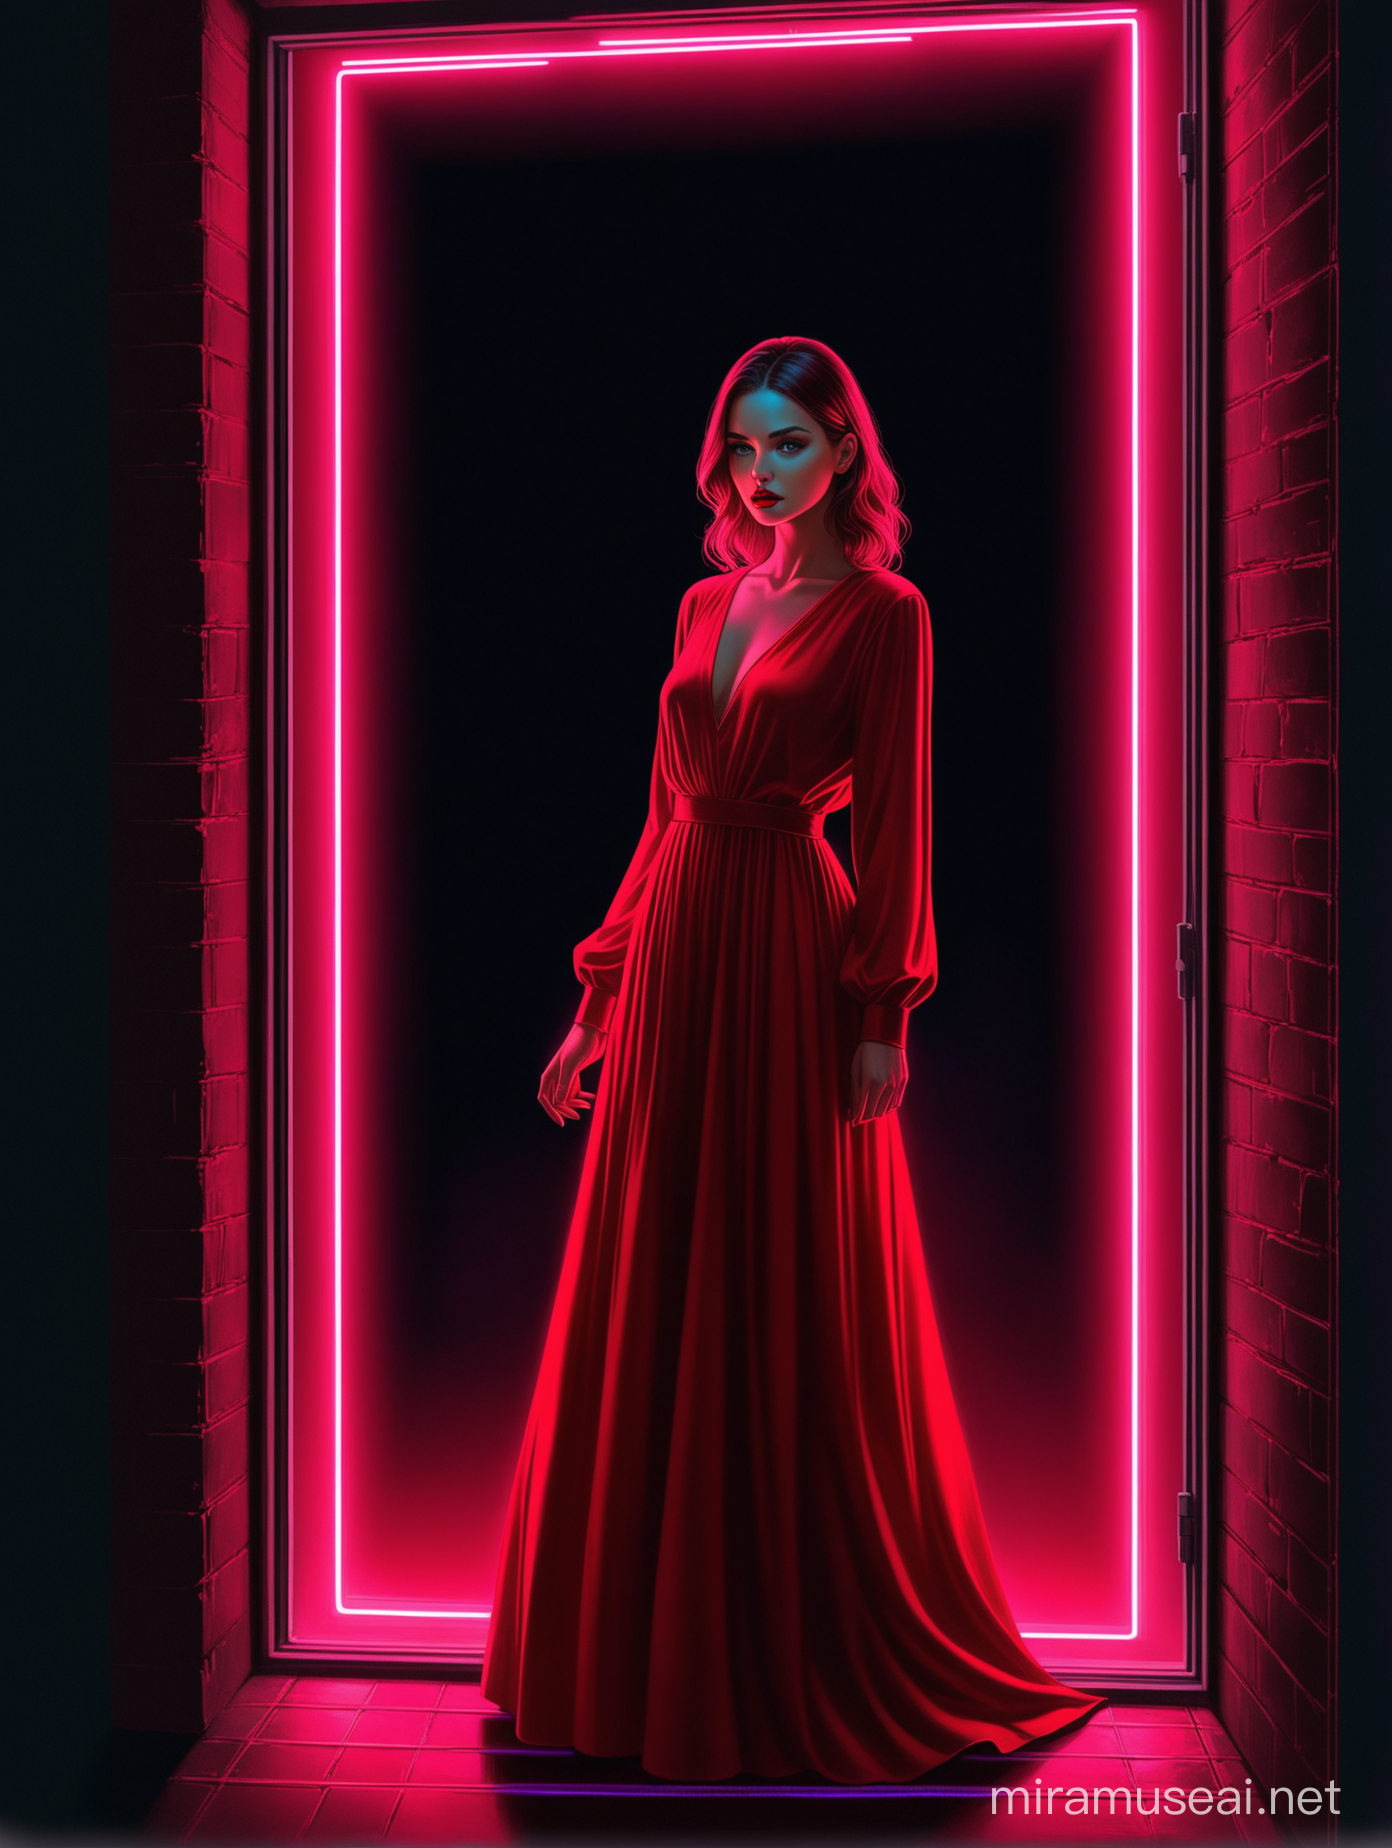 Elegant Young Woman in Neon Lit Evening Gown Gazes Out Window with Anxious Expression